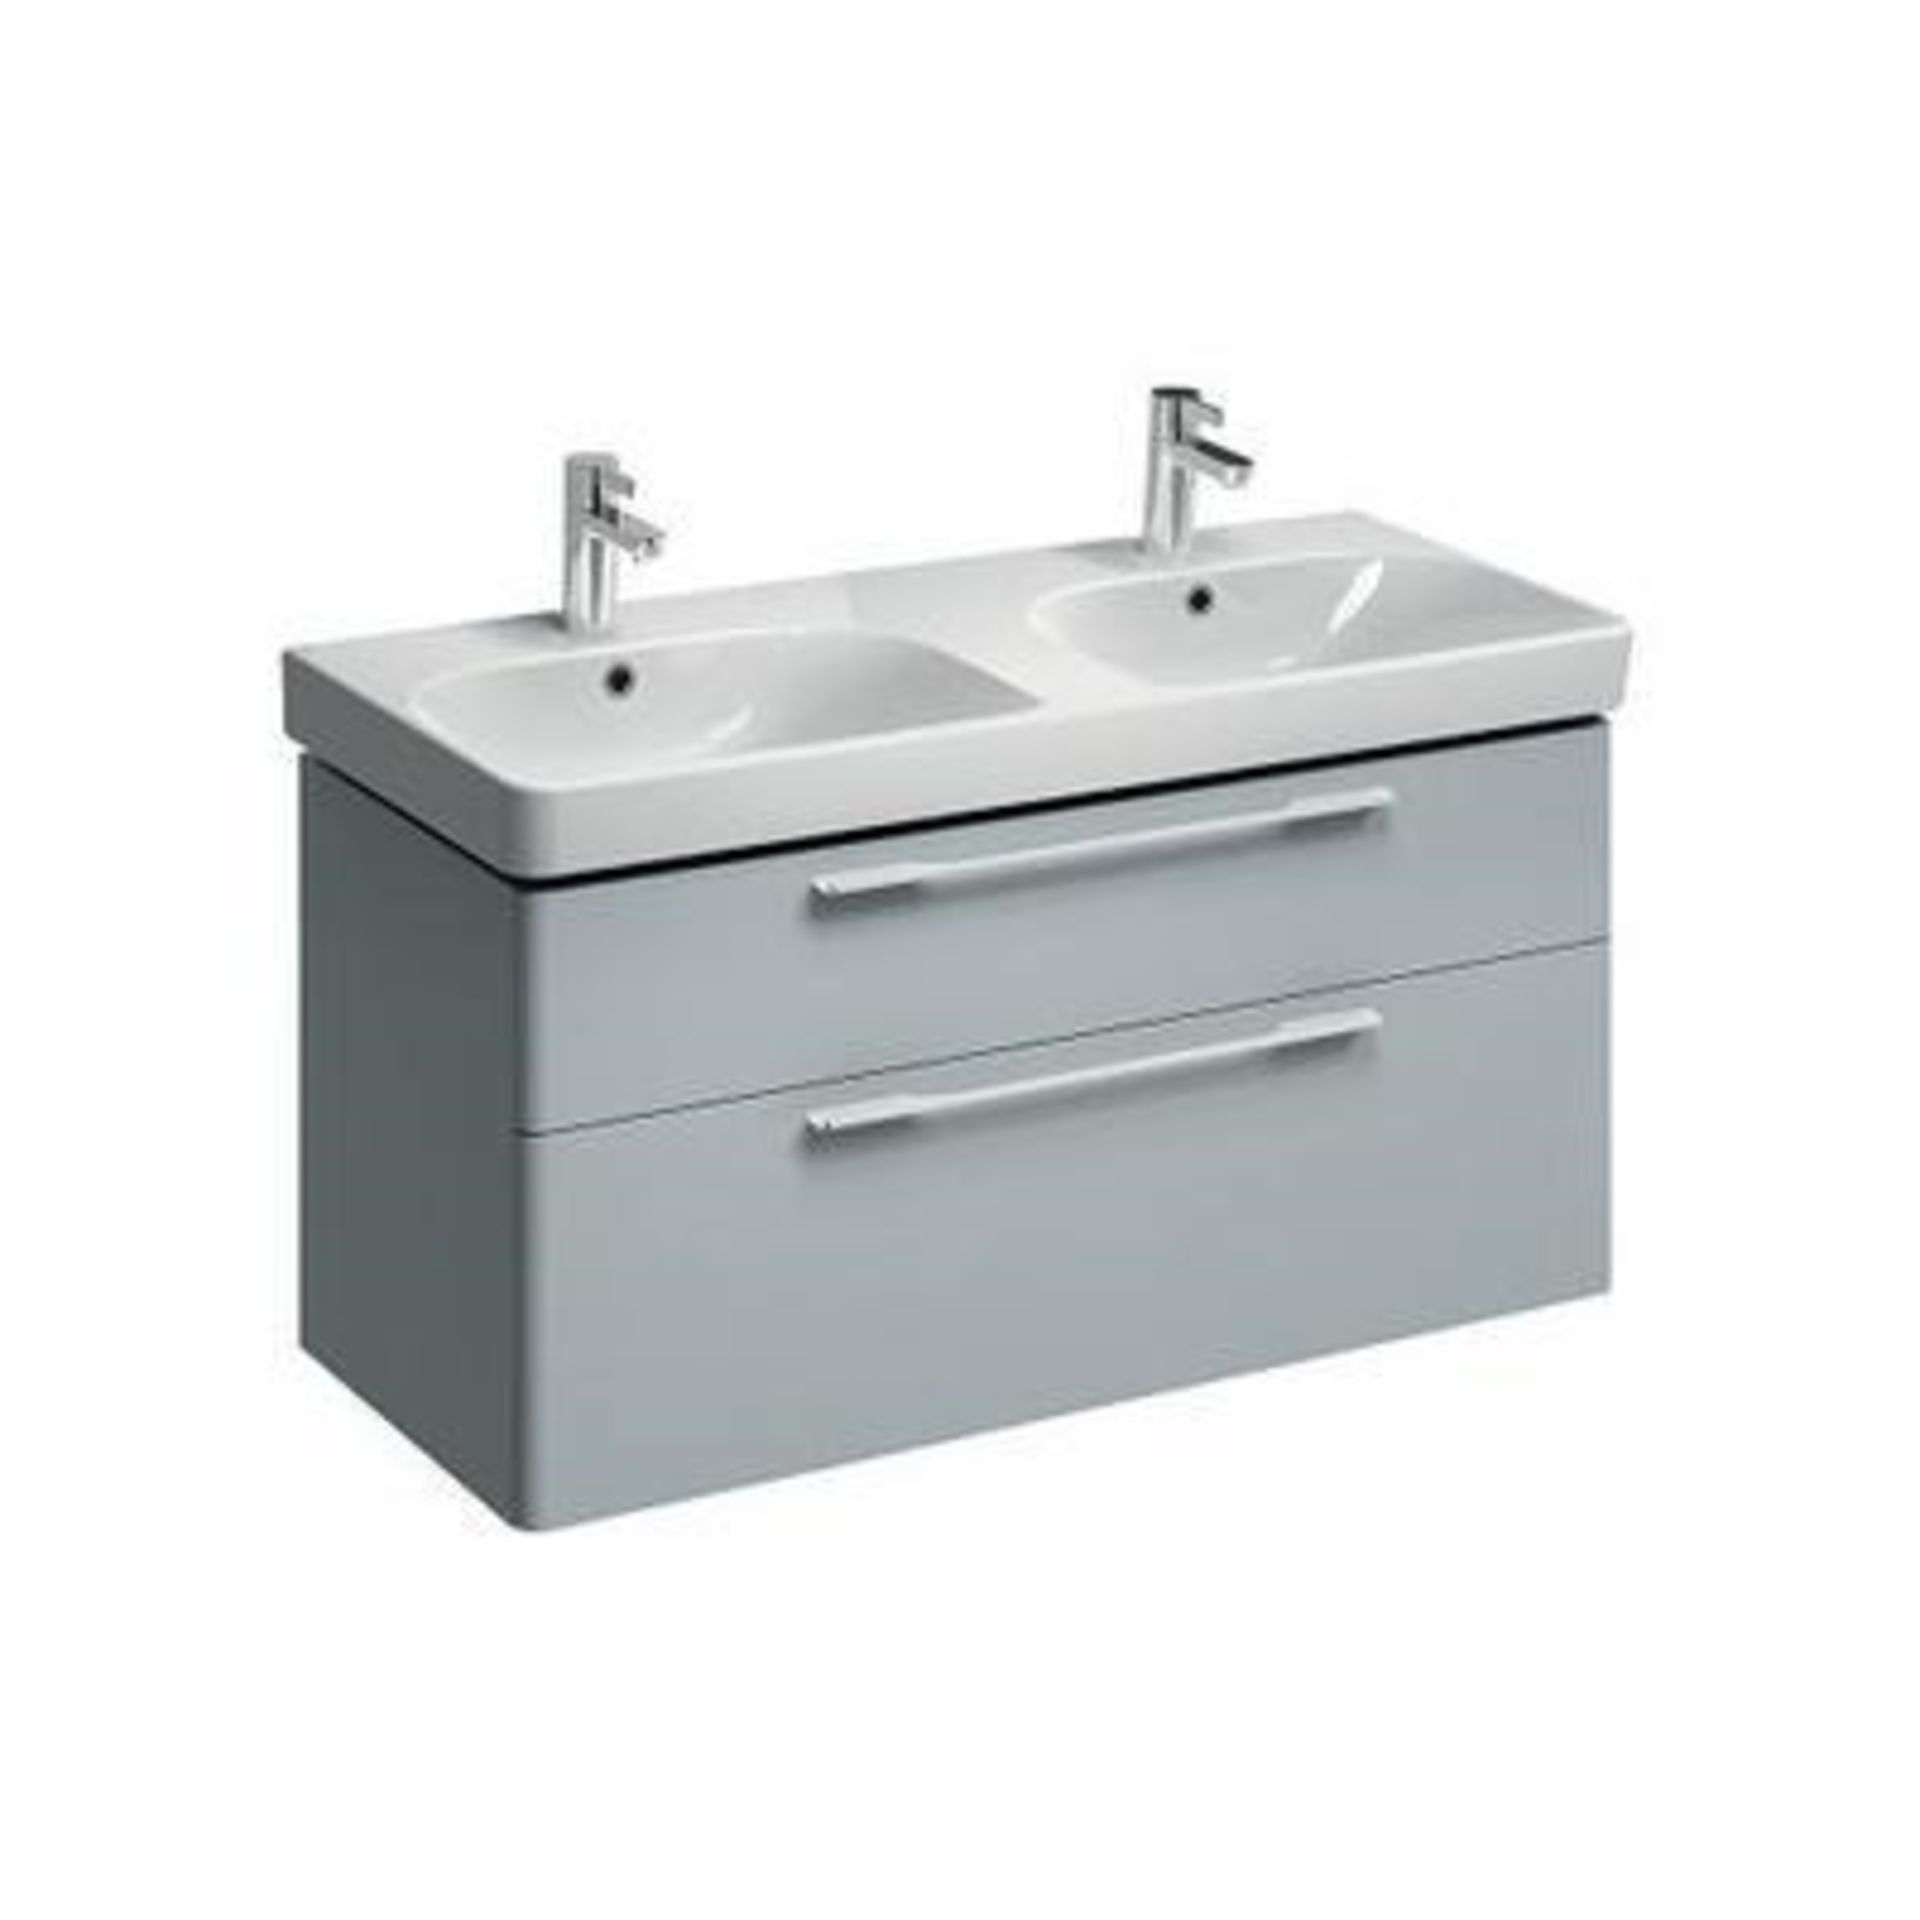 (KN7) Keramag Gerbit 1200mm Grey Vanity Unit. RRP £996.99.Comes complete with basin. For 12...